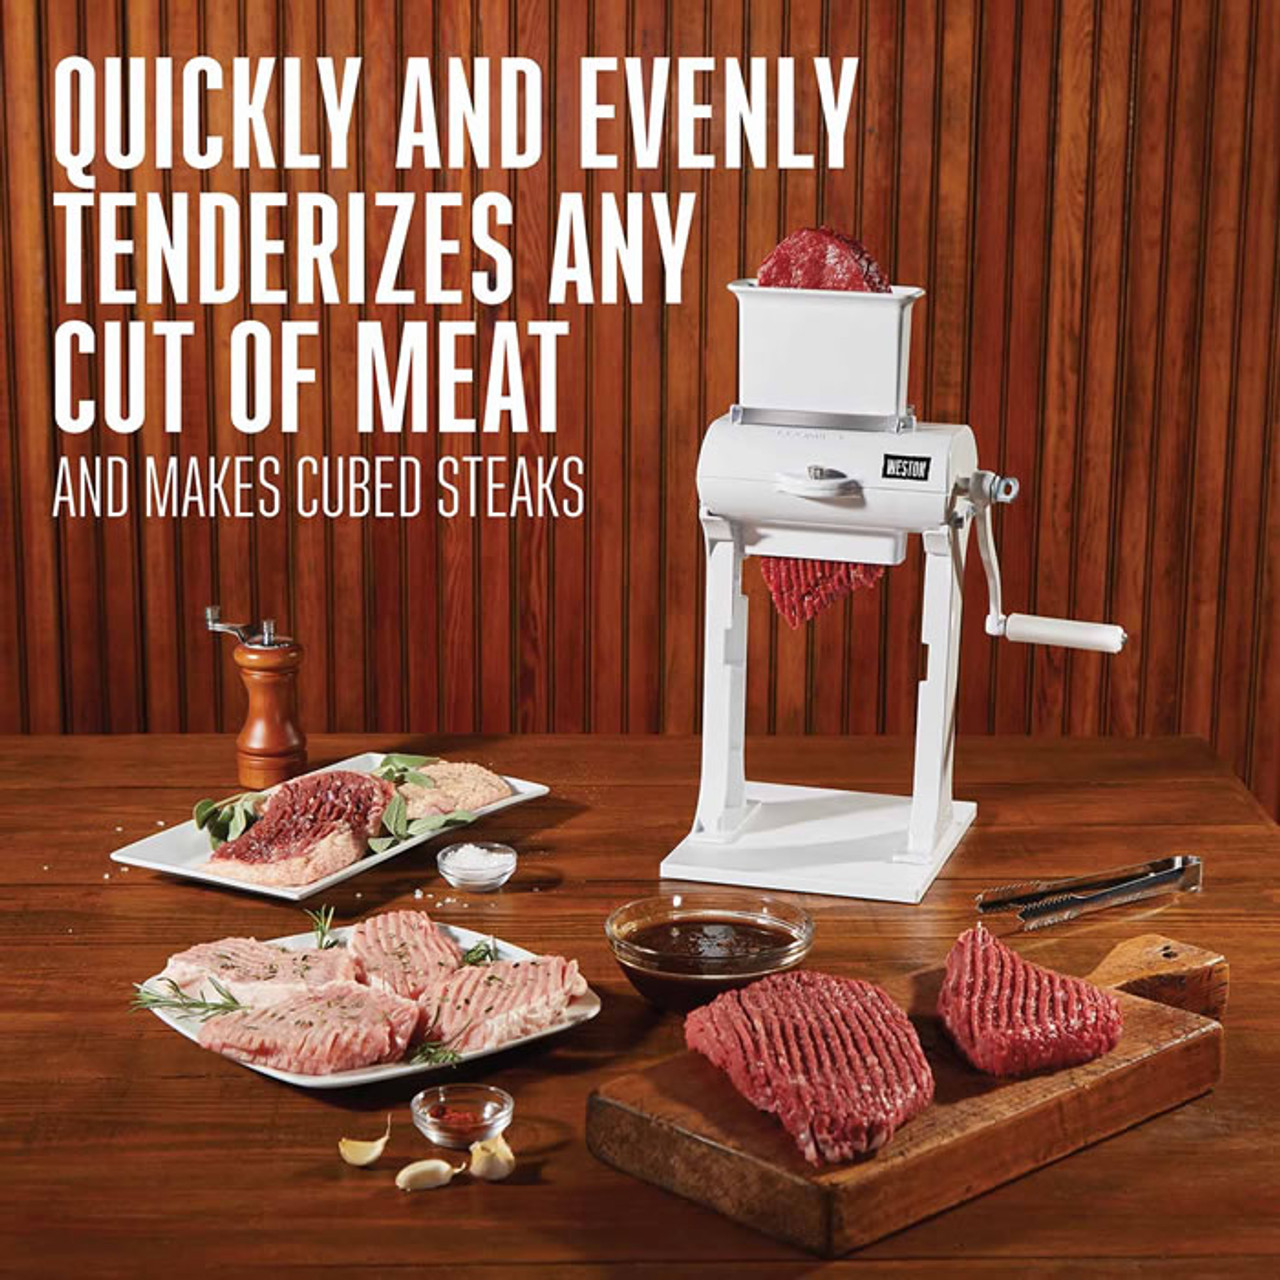 Magnificent Meat Tenderizer For KitchenAid Mixer - Review - A Life